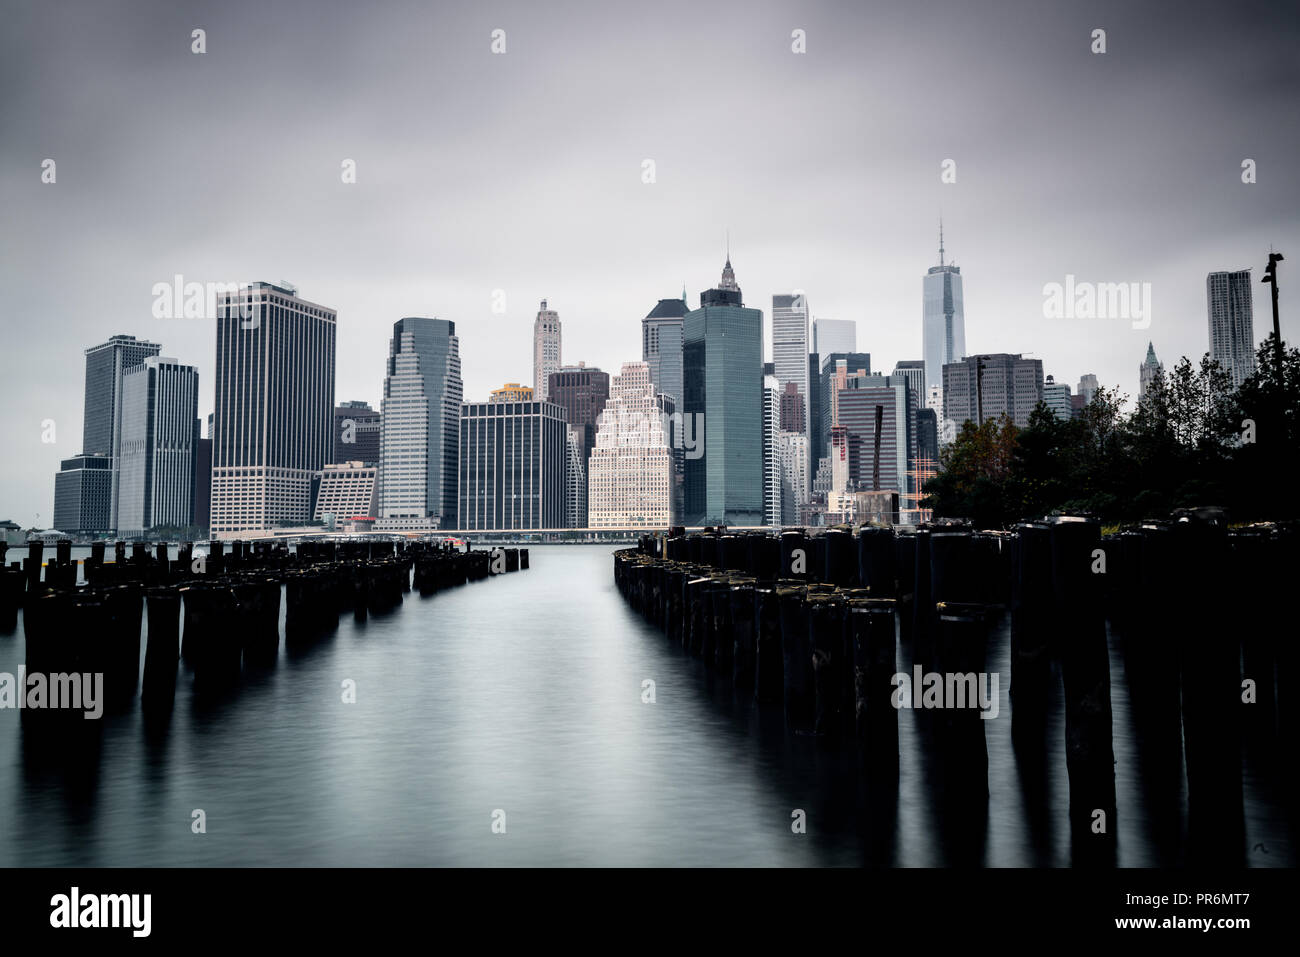 Long exposure shot of Manhattan's Financial District on a cloudy Summer morning, with old piers in the foreground. Desaturated, high contrast. Stock Photo